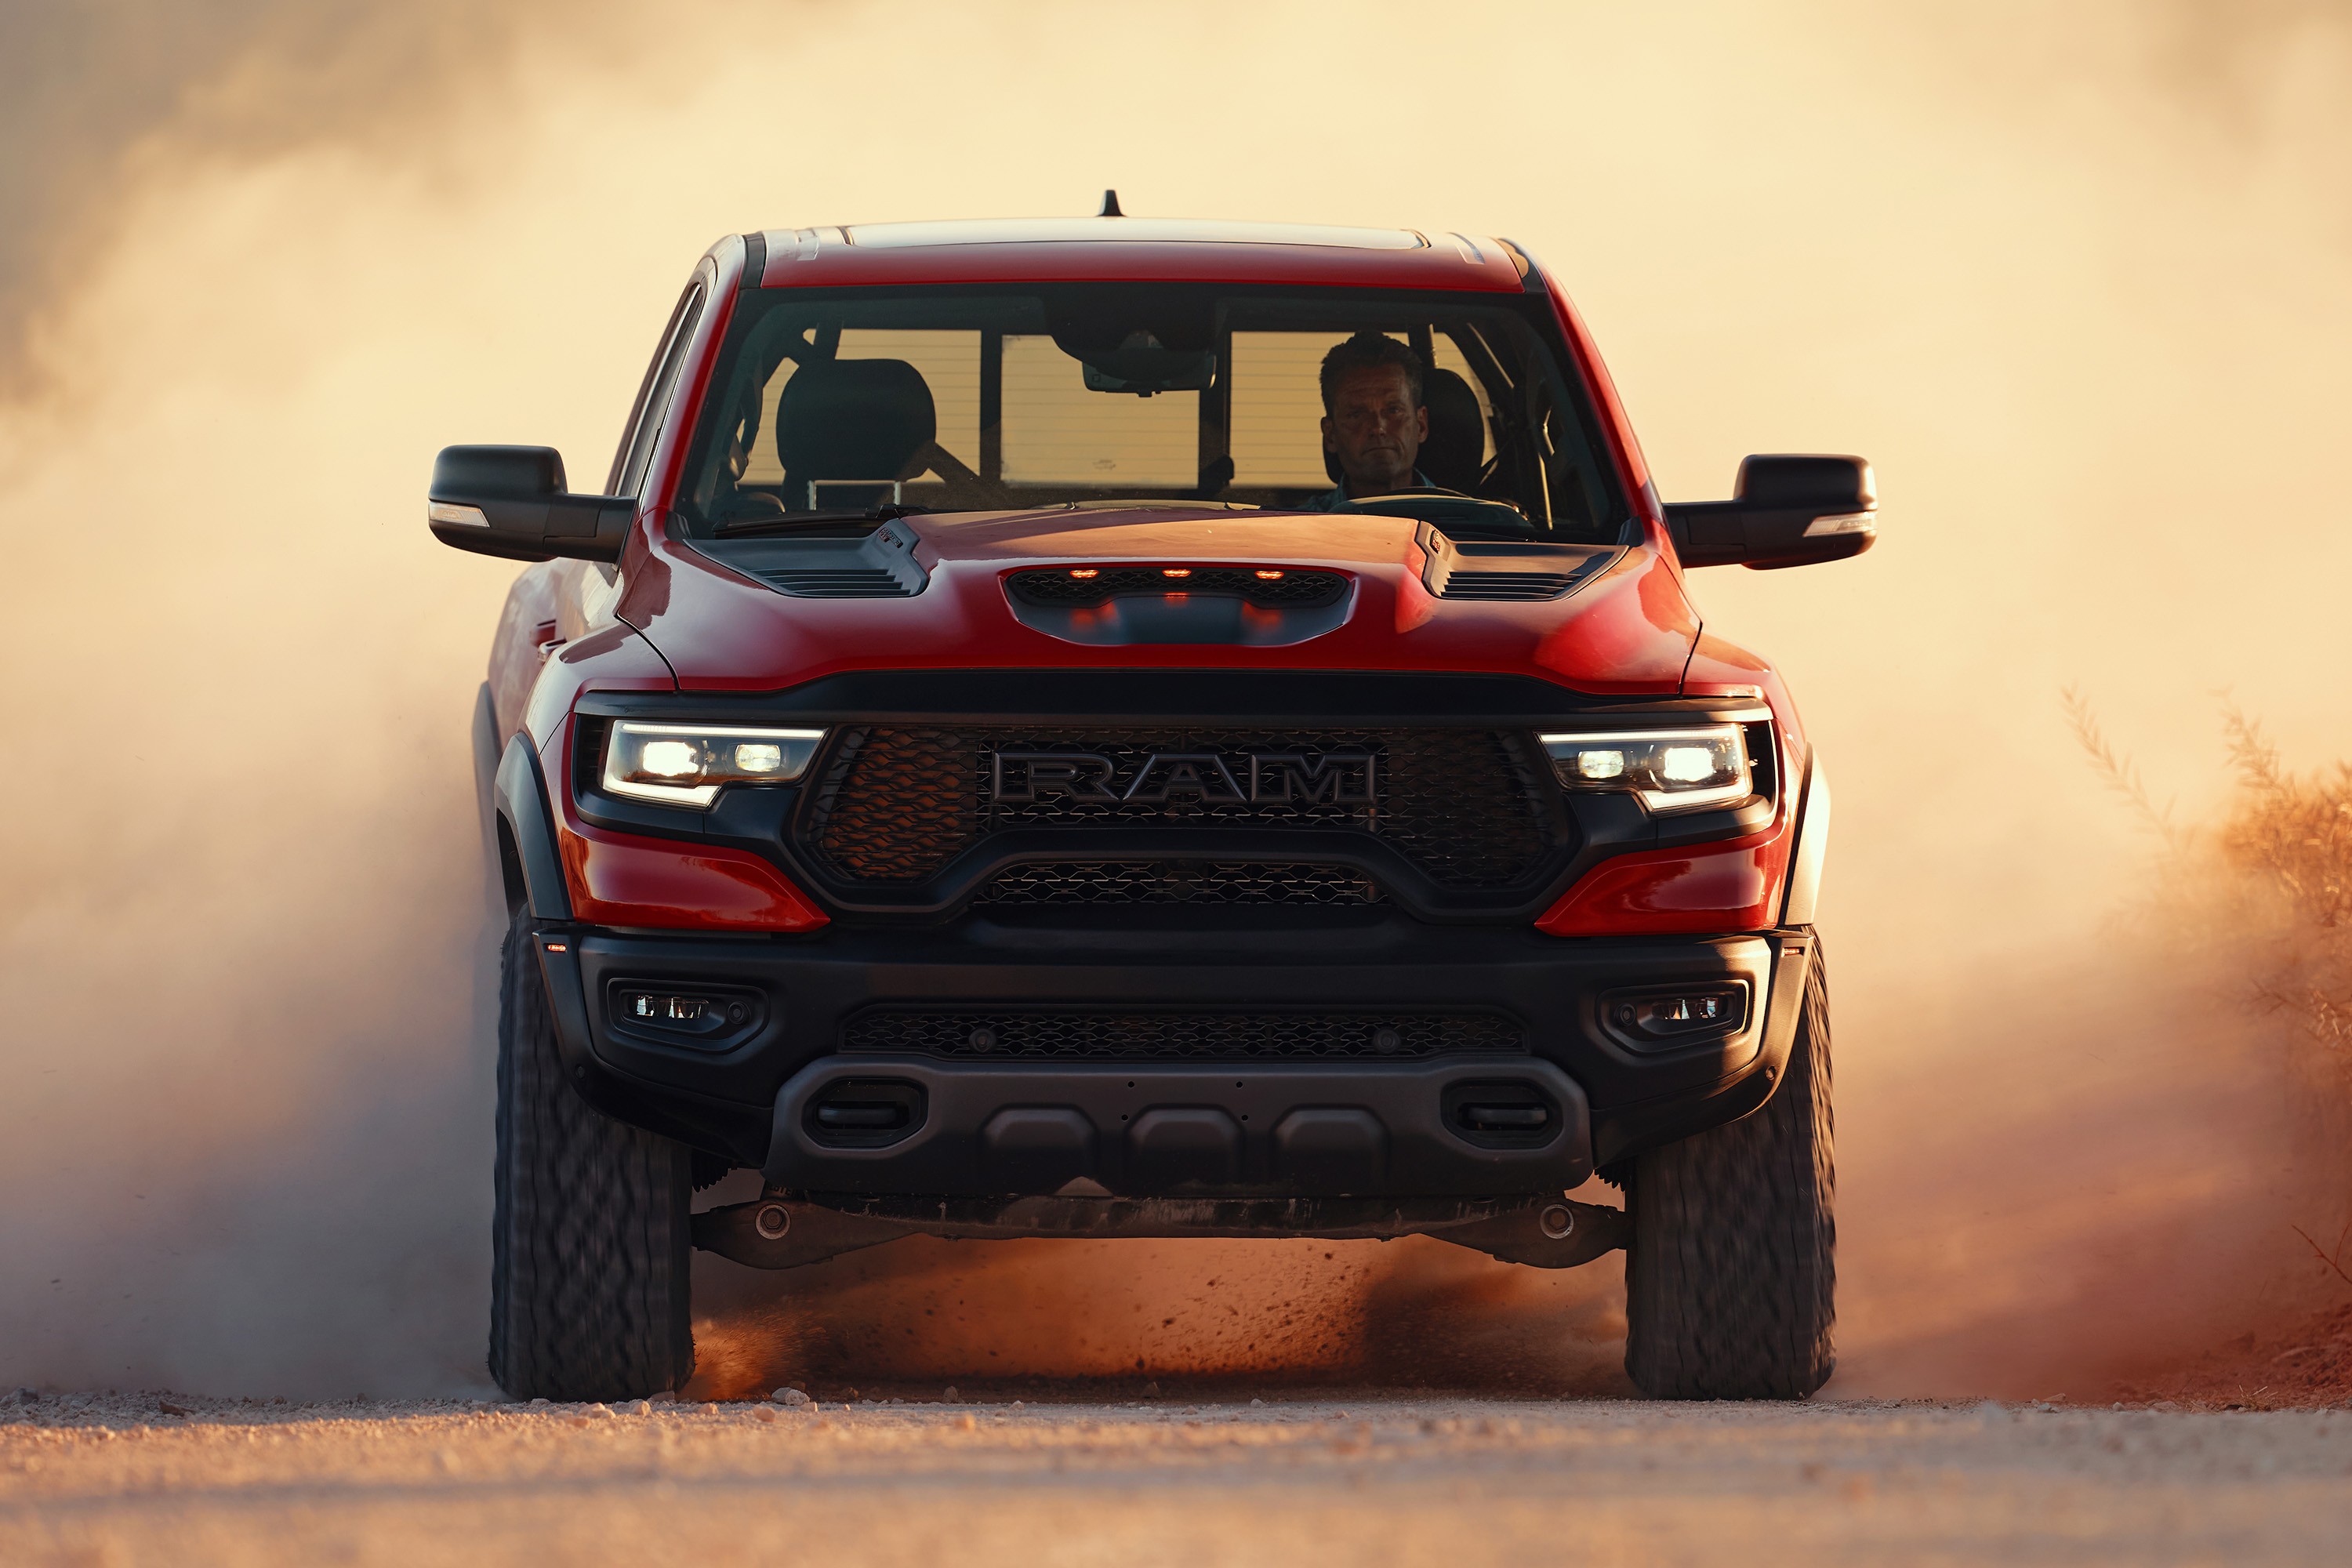 2021 Ram 1500 TRX Revealed, Ford F-150 Raptor Doesn’t Look So Tough Now ...